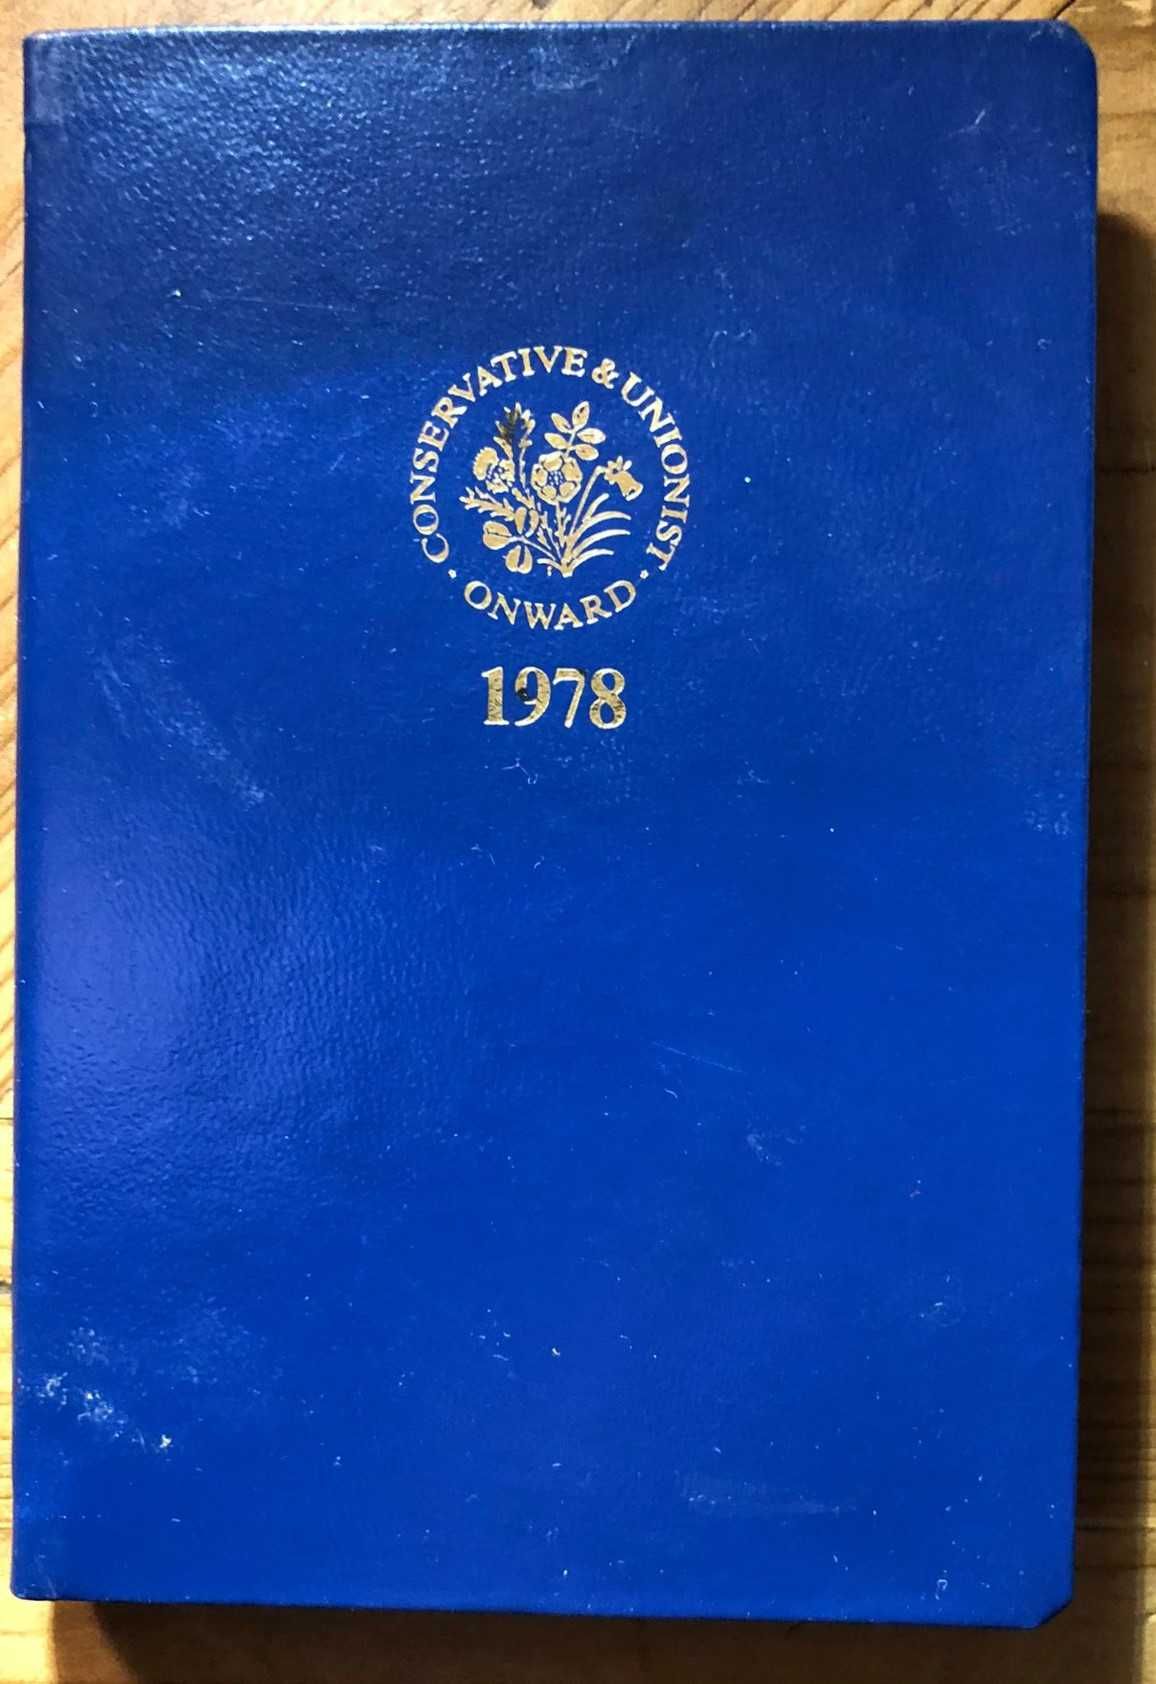 Agenda “The Conservative Party Diary 1978”